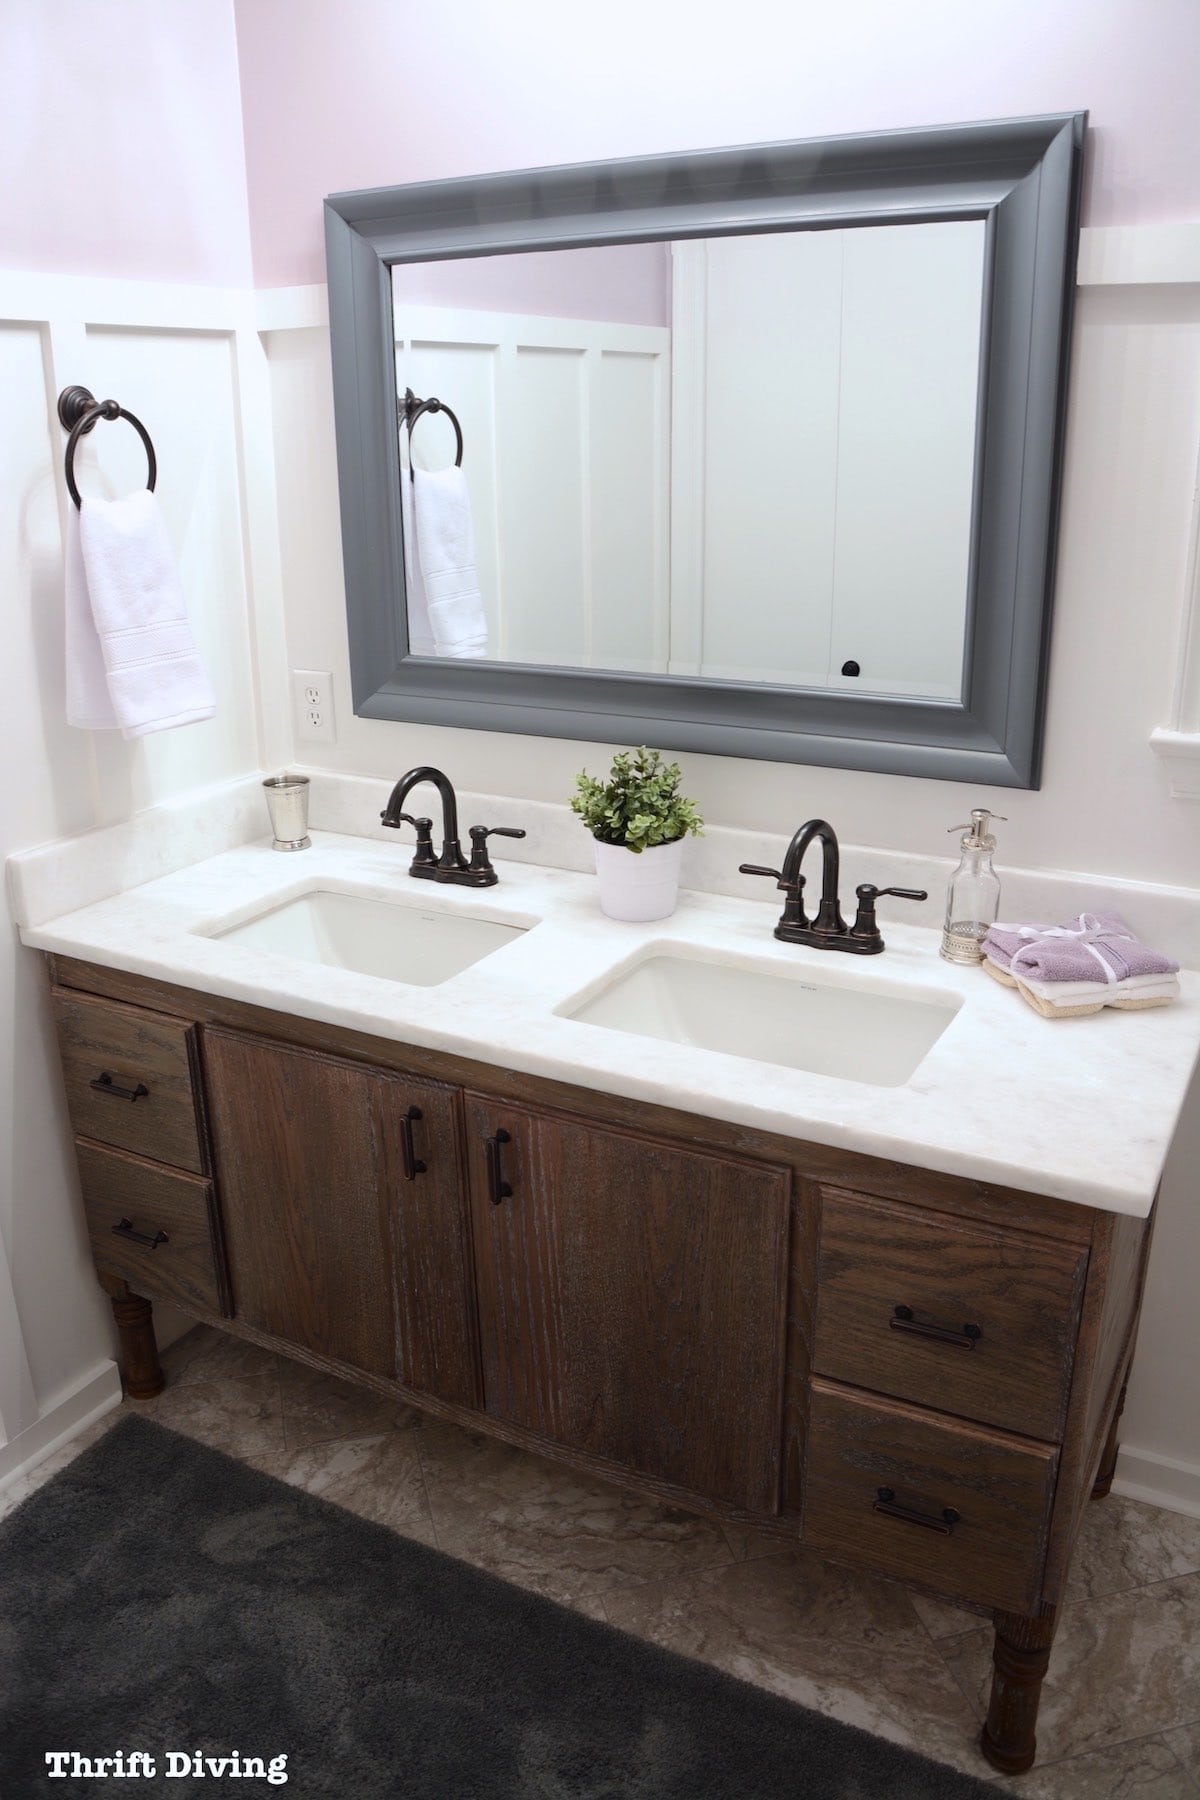 DIY bathroom vanity made from scratch - Thrift Diving